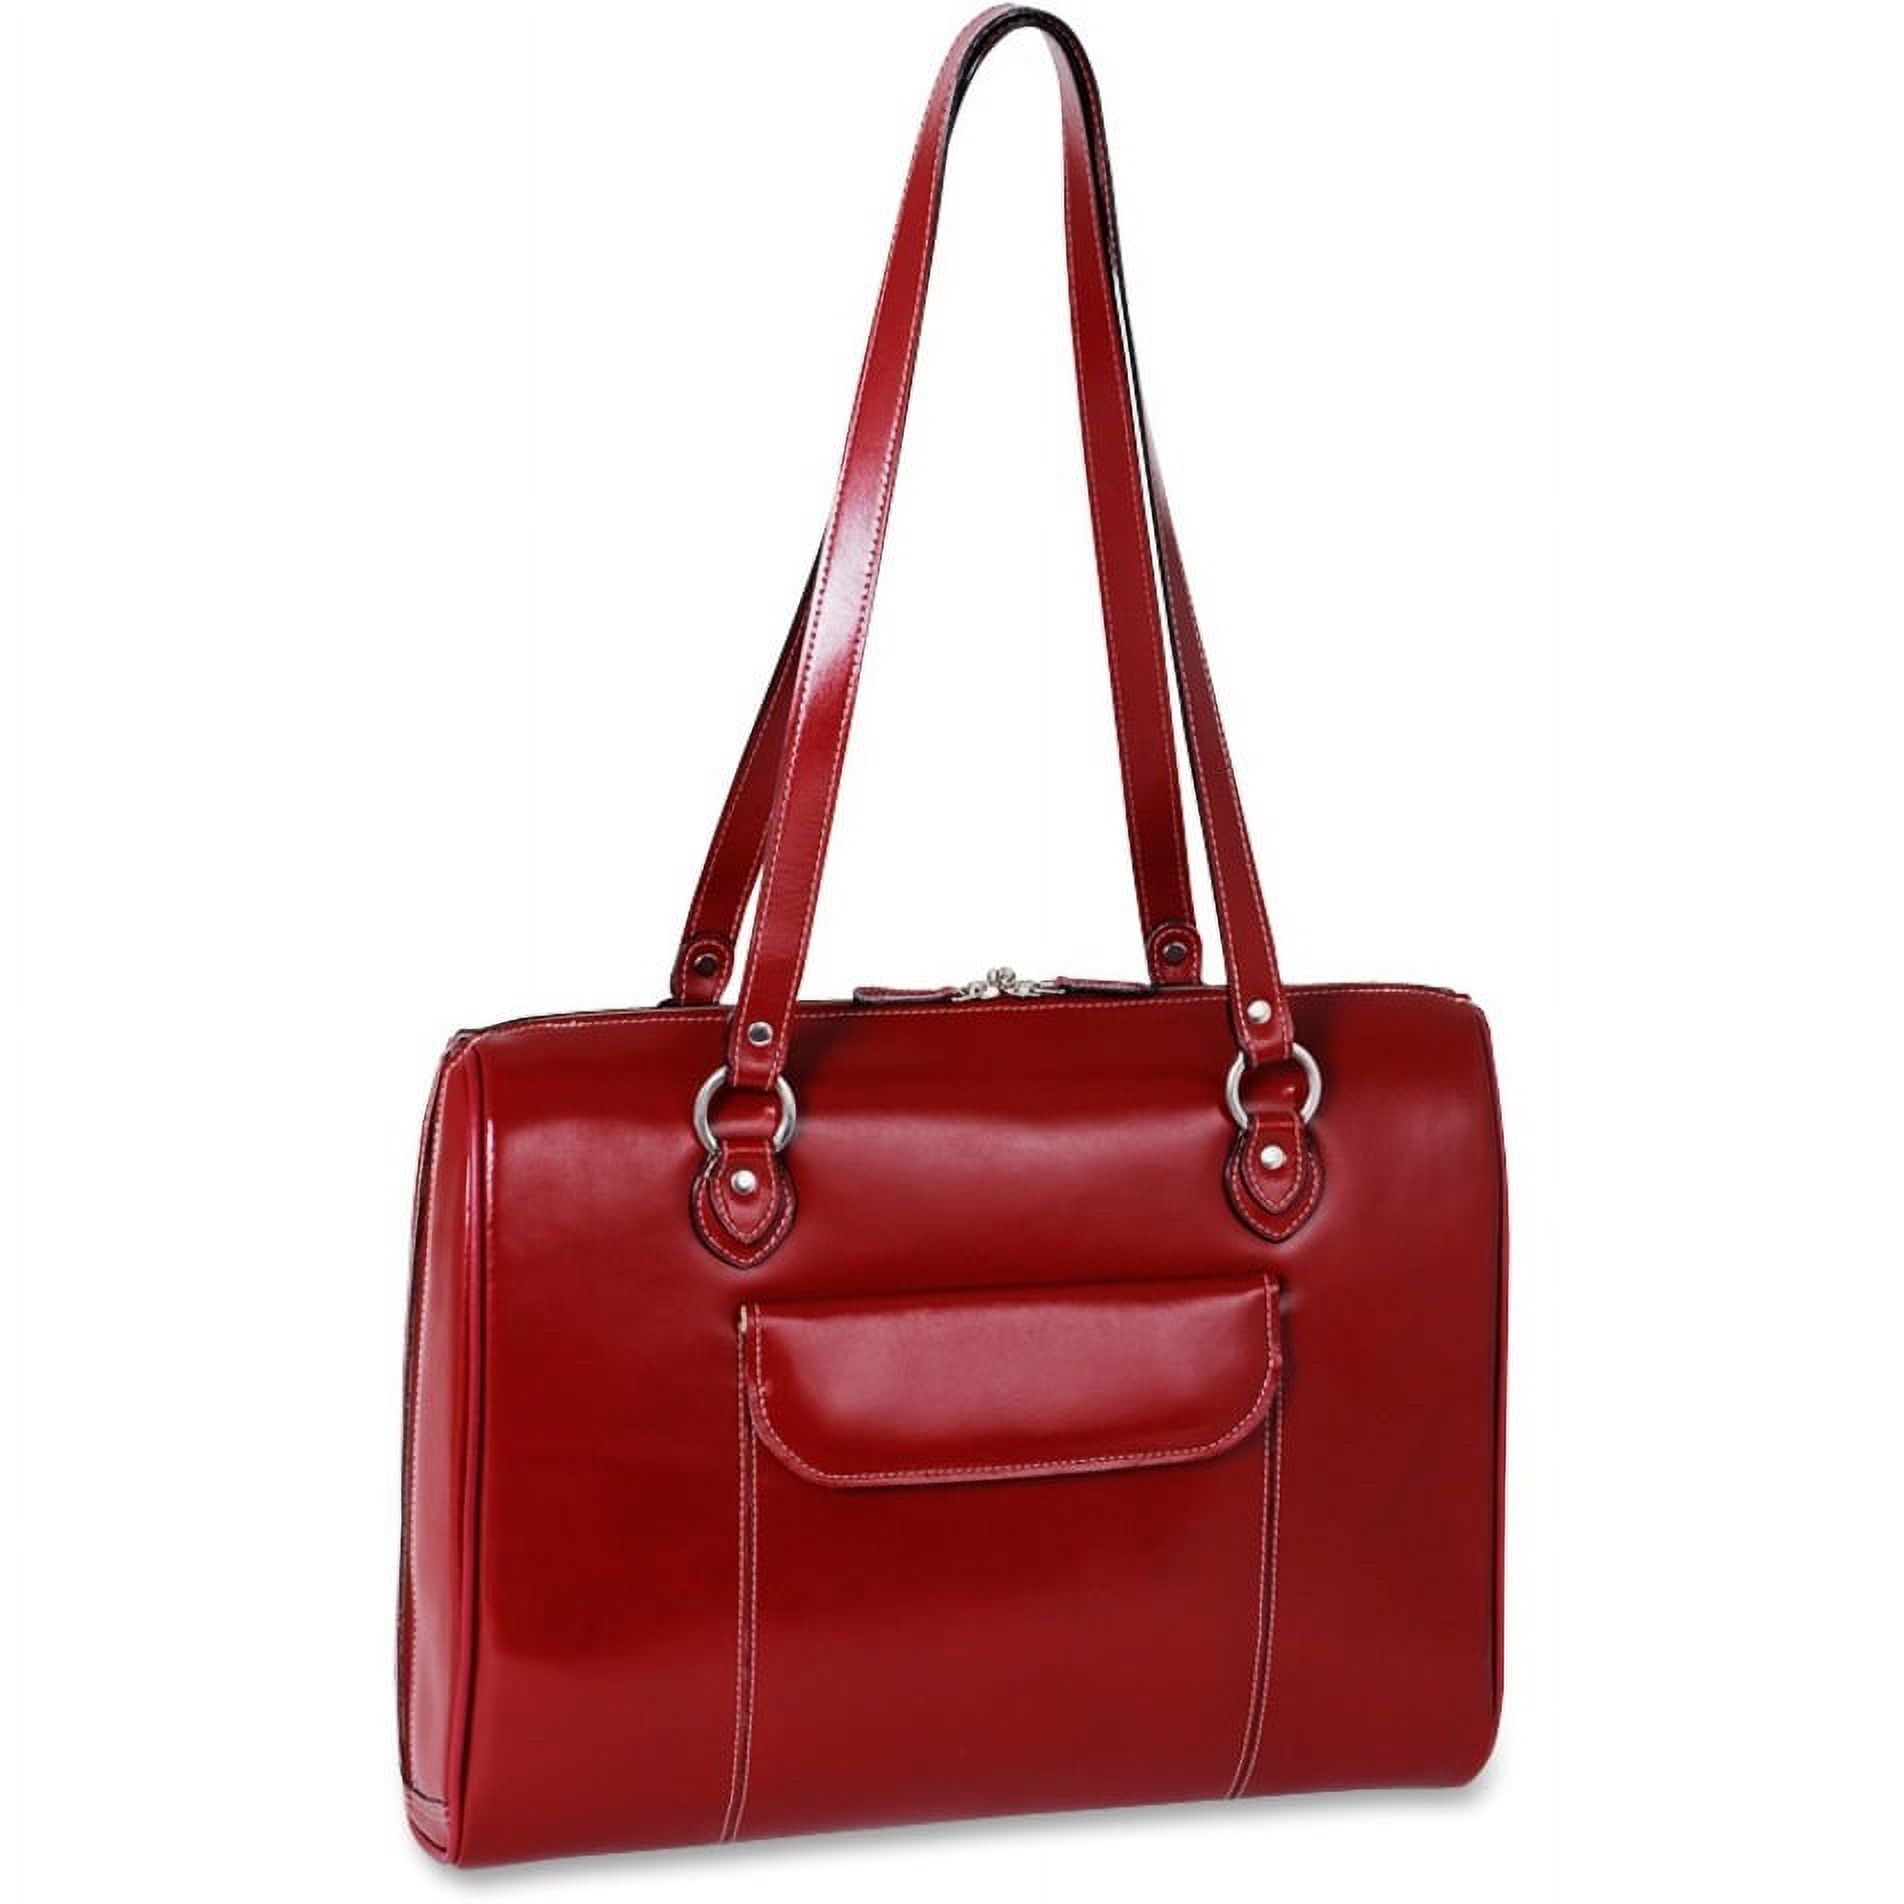 McKlein GLENVIEW, Ladies' Laptop Briefcase, Top Grain Cowhide Leather, Red (94746) - image 1 of 2